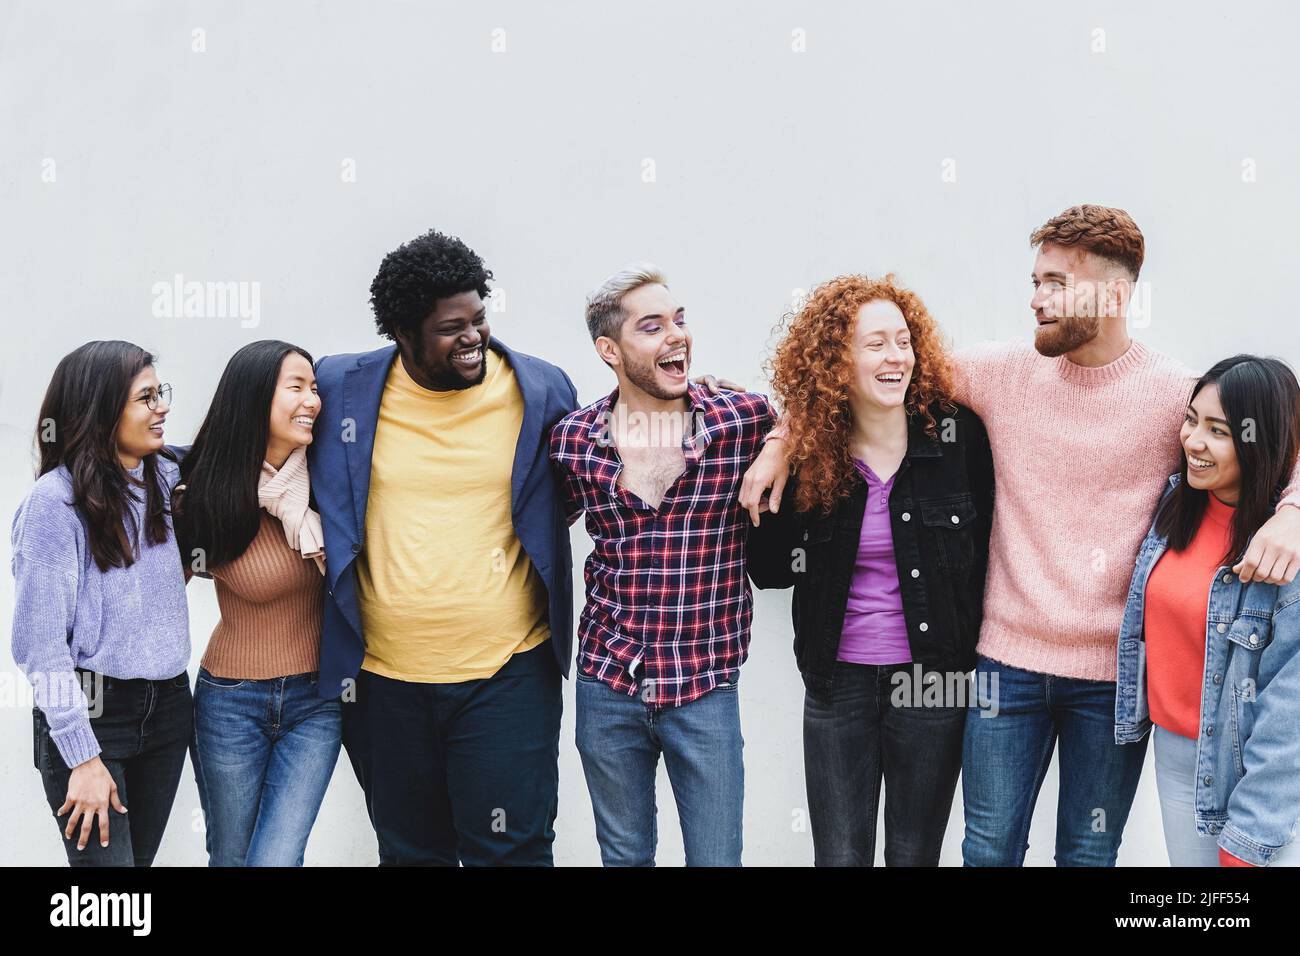 Diverse group of friends having fun together outdoor - Focus on gay man wearing makeup Stock Photo